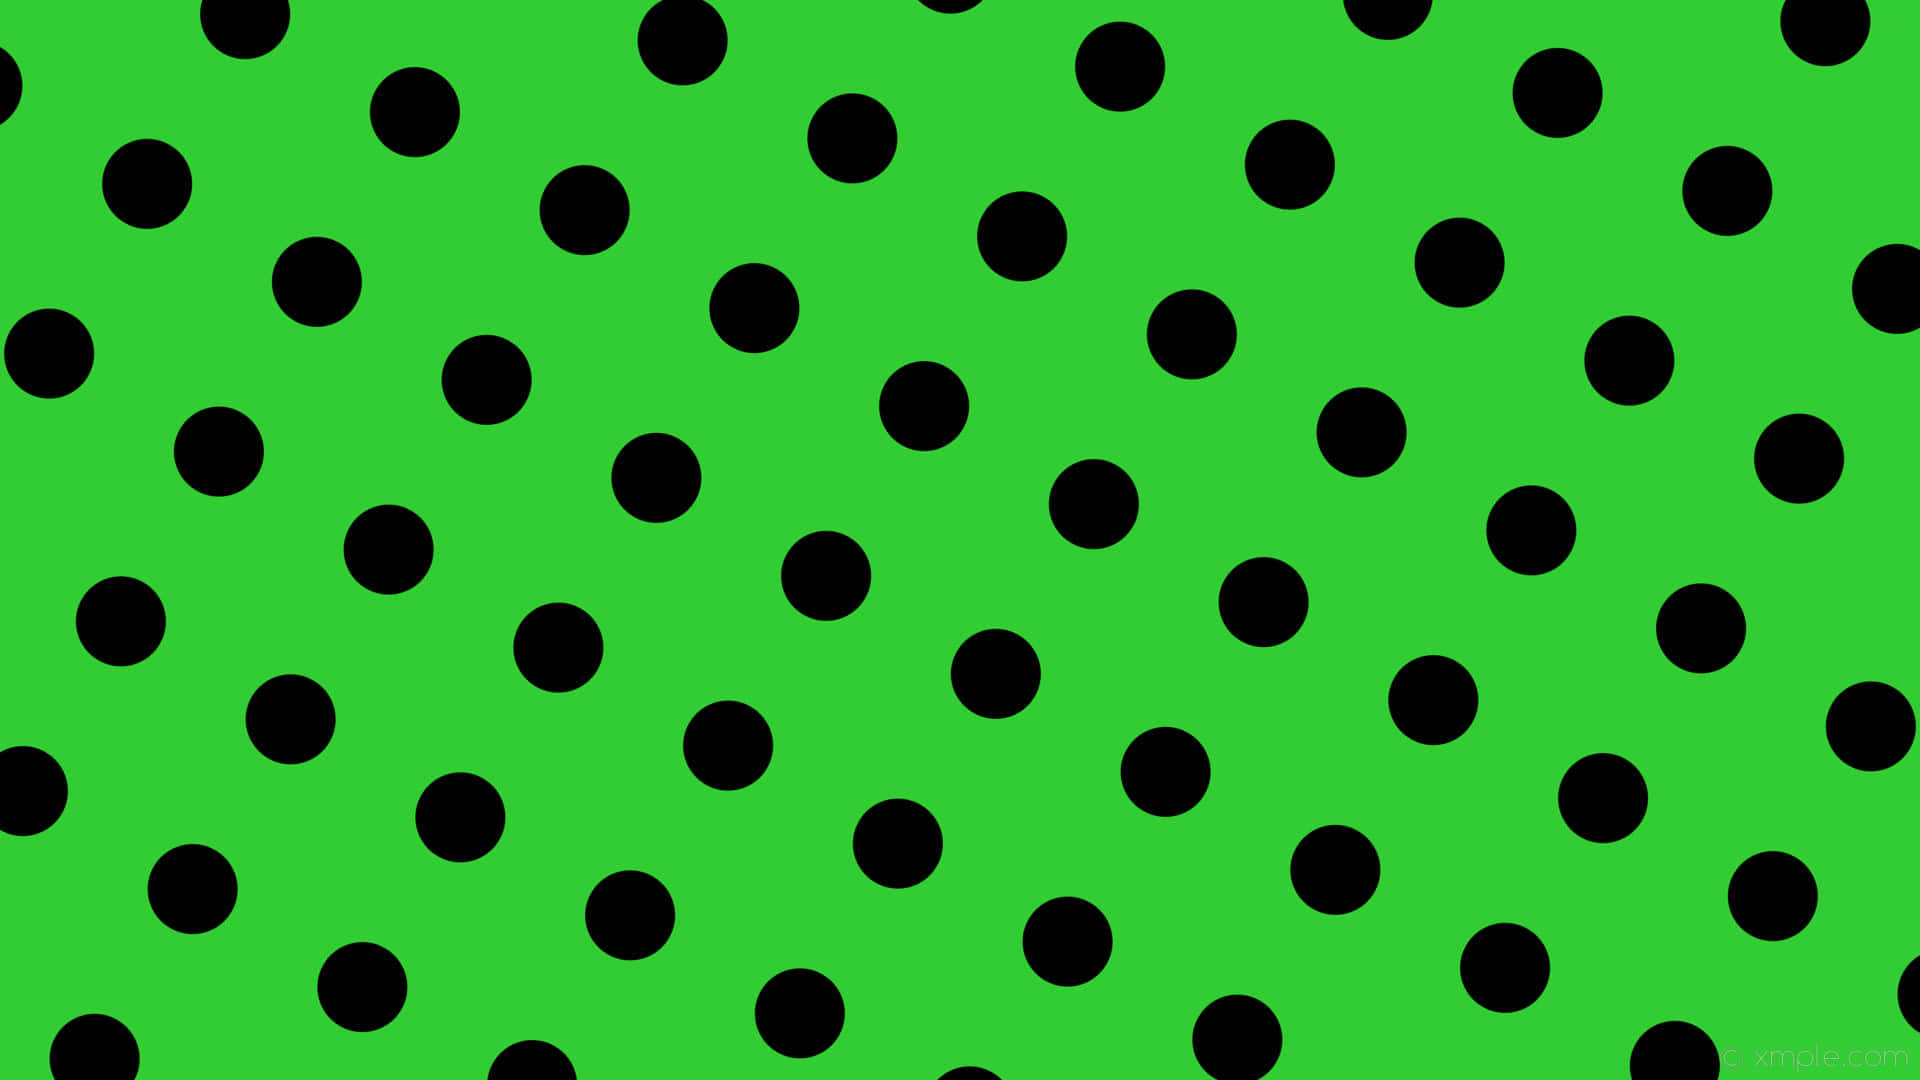 A Green Background With Black Dots Wallpaper